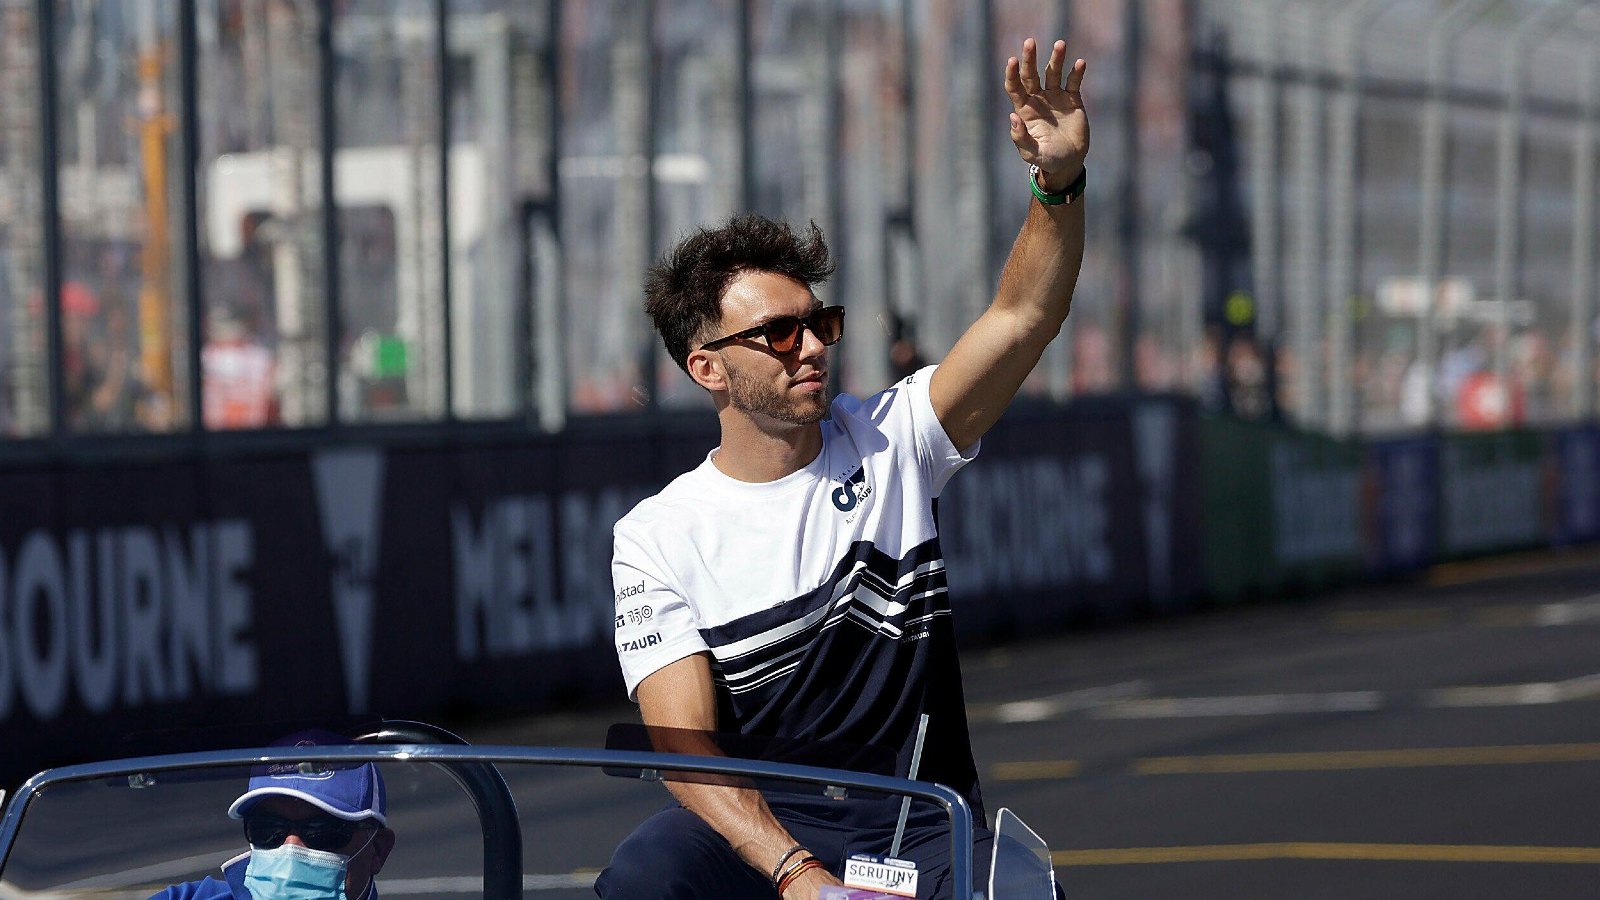 Pierre Gasly waving whilst sat in a car. Melbourne, April 2022.